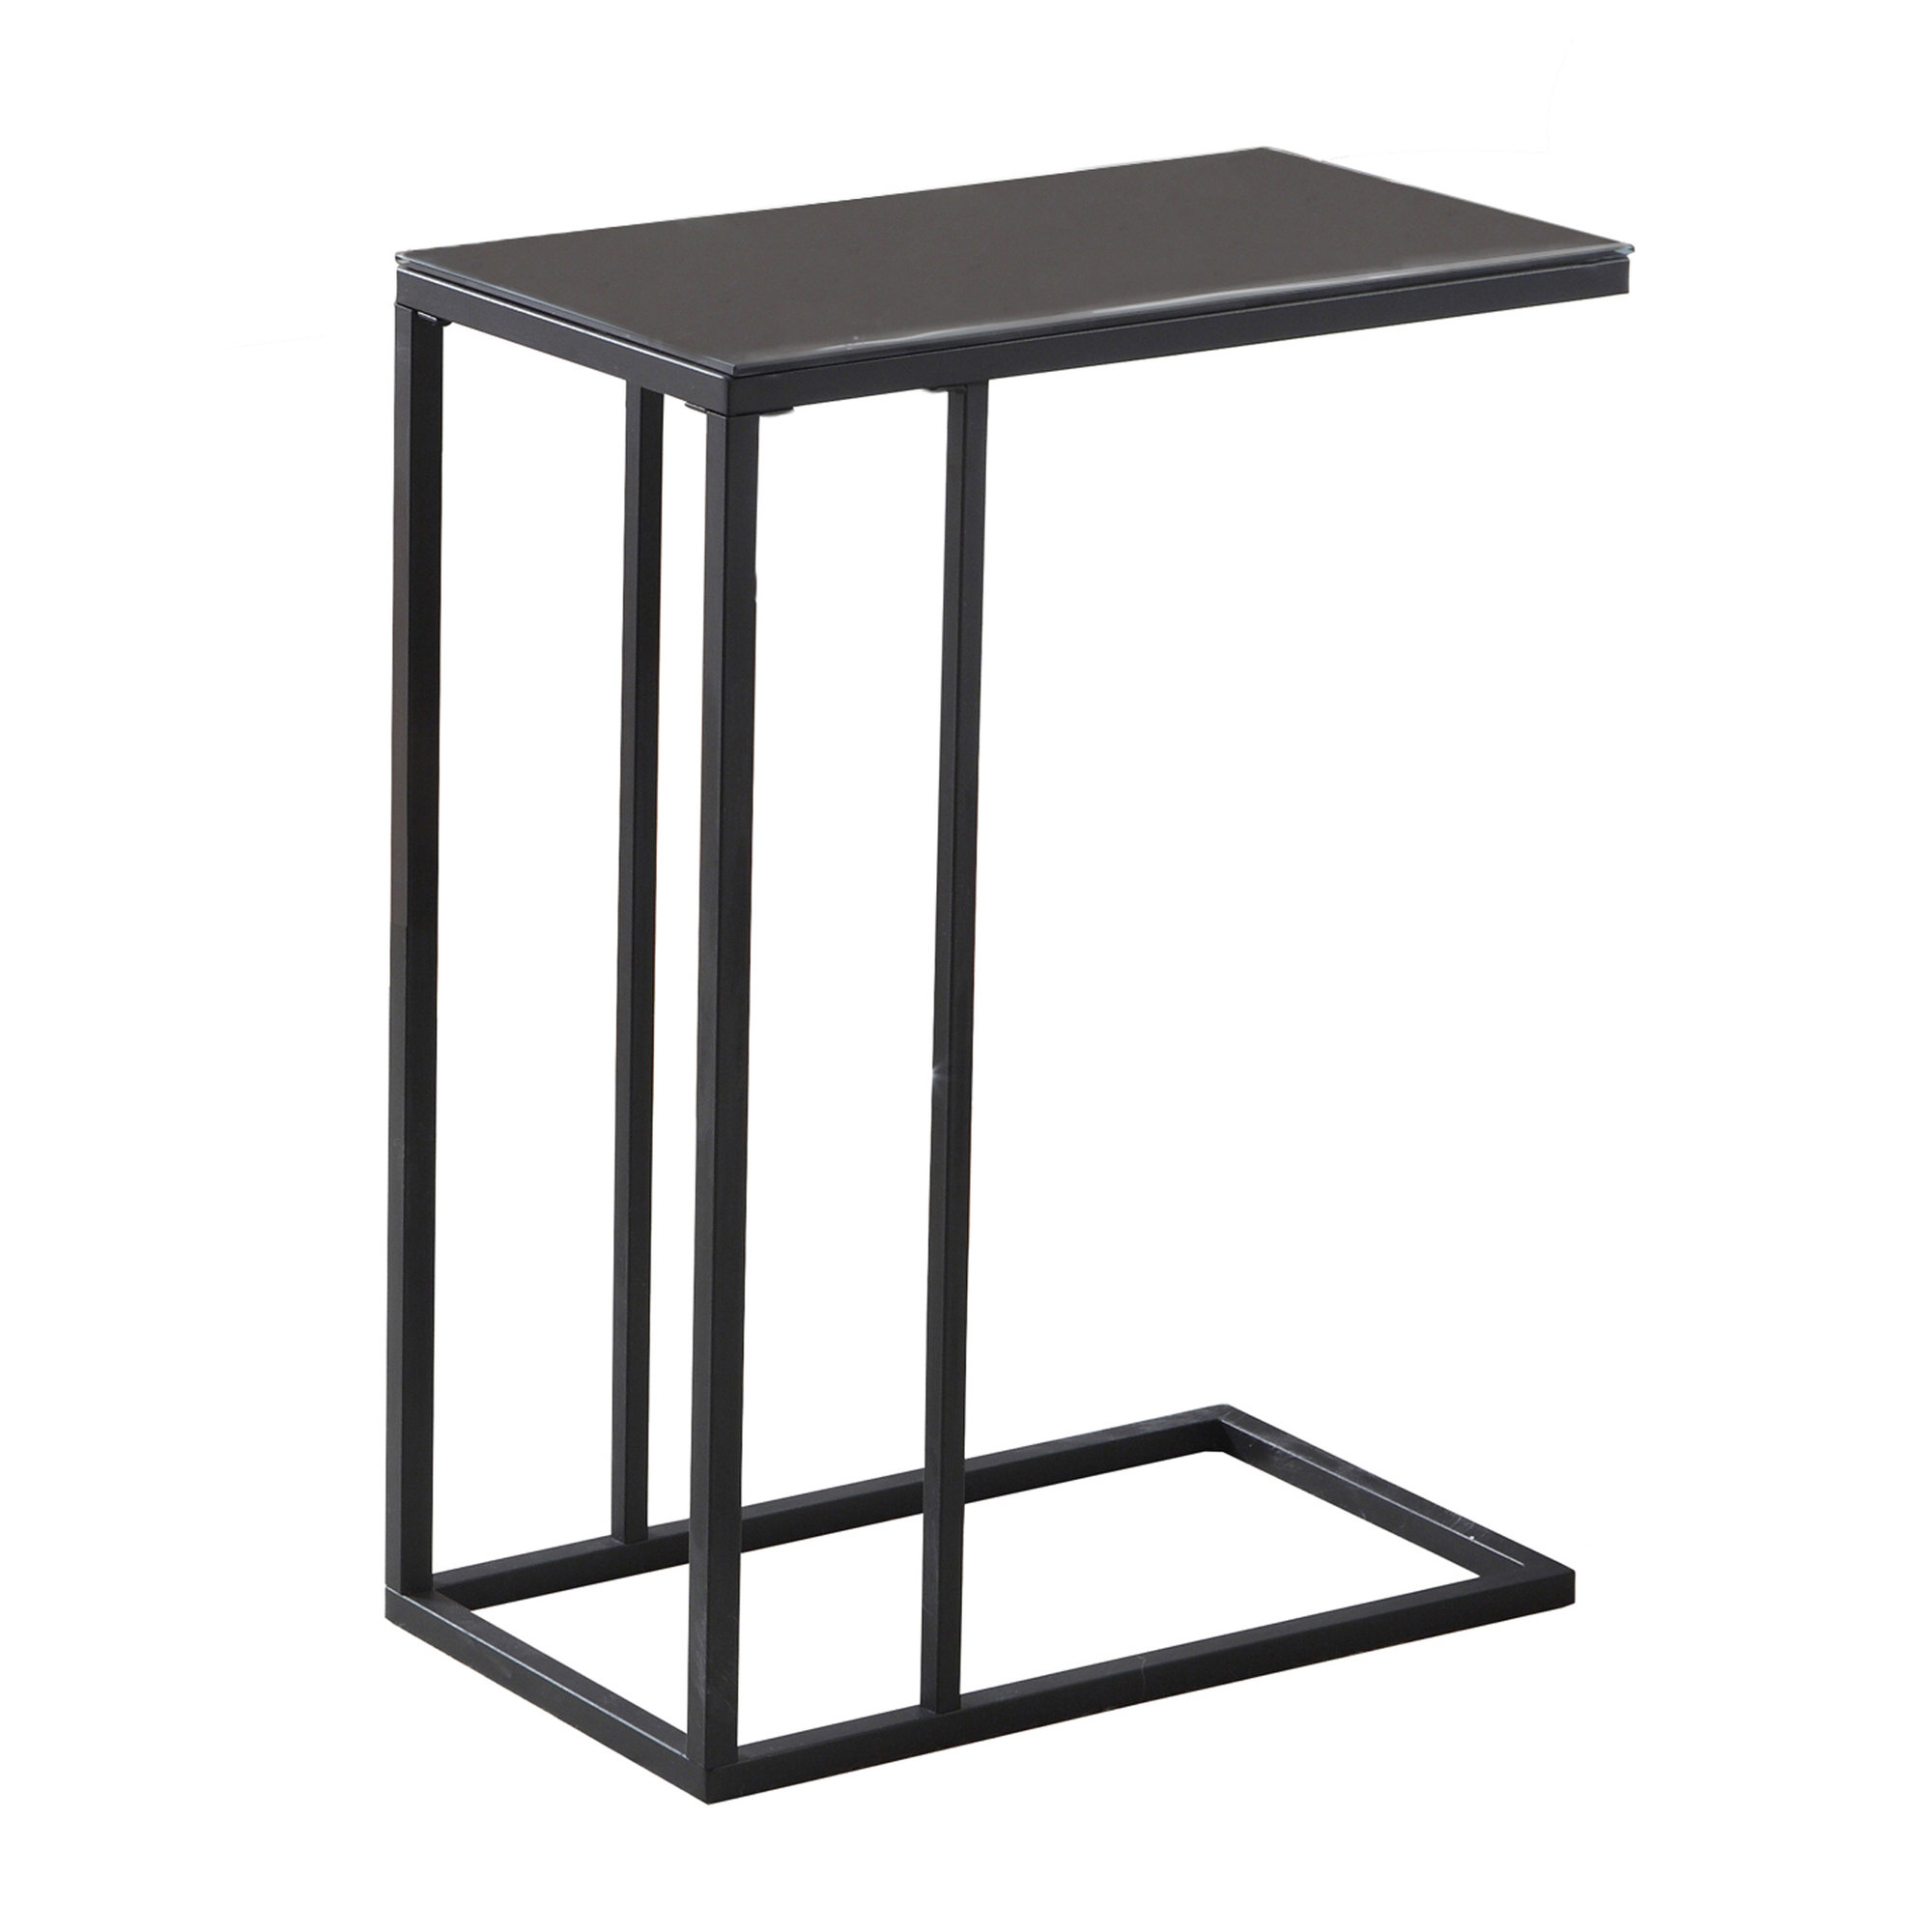 24" Accent Table with Tempered Glass Top, Black